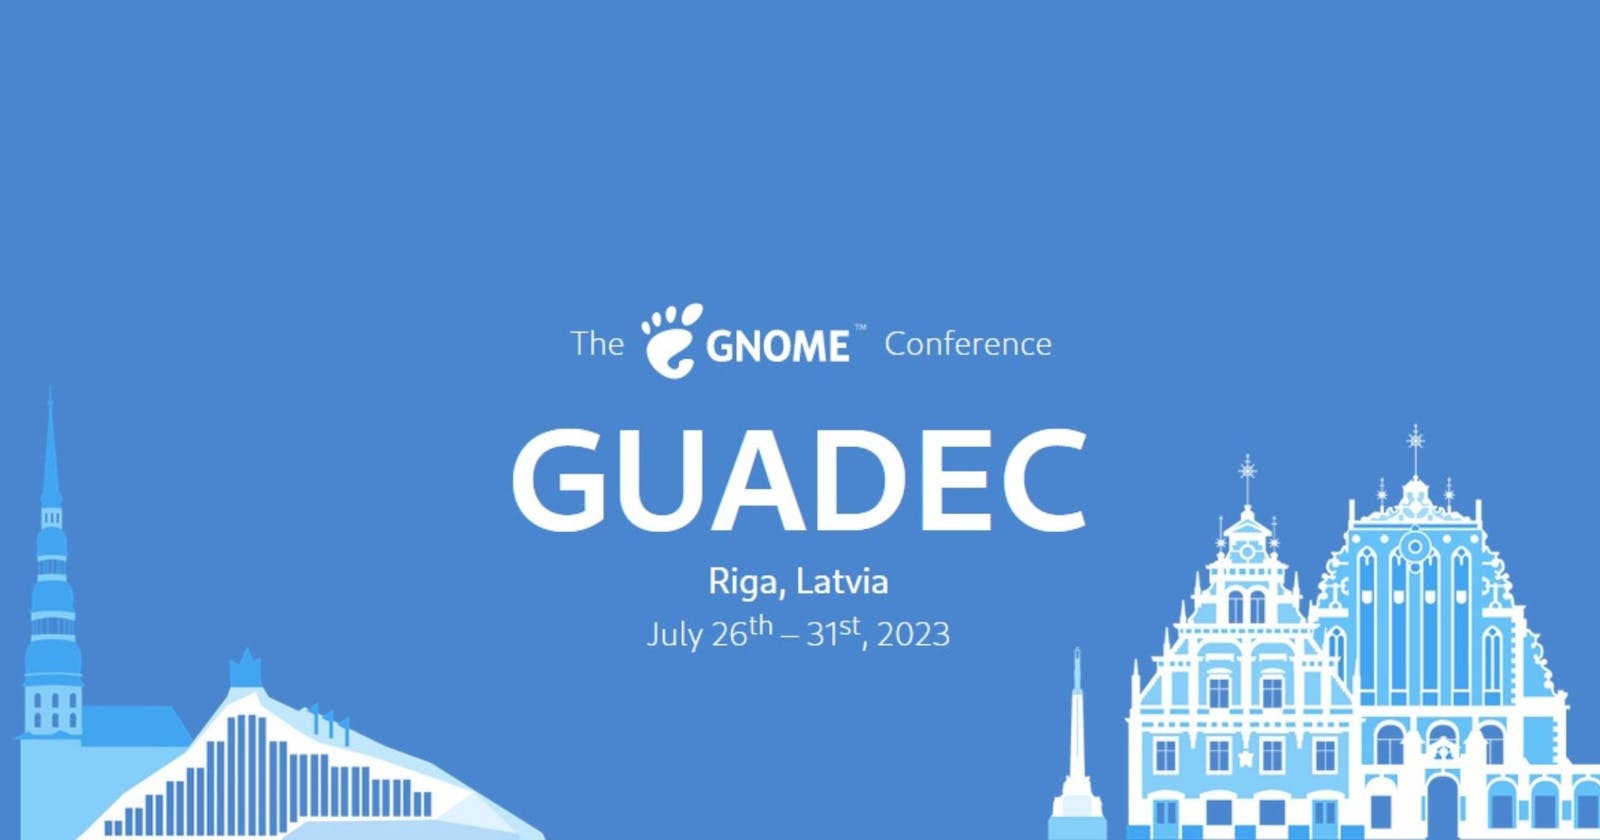 My first conference: GUADEC 2023